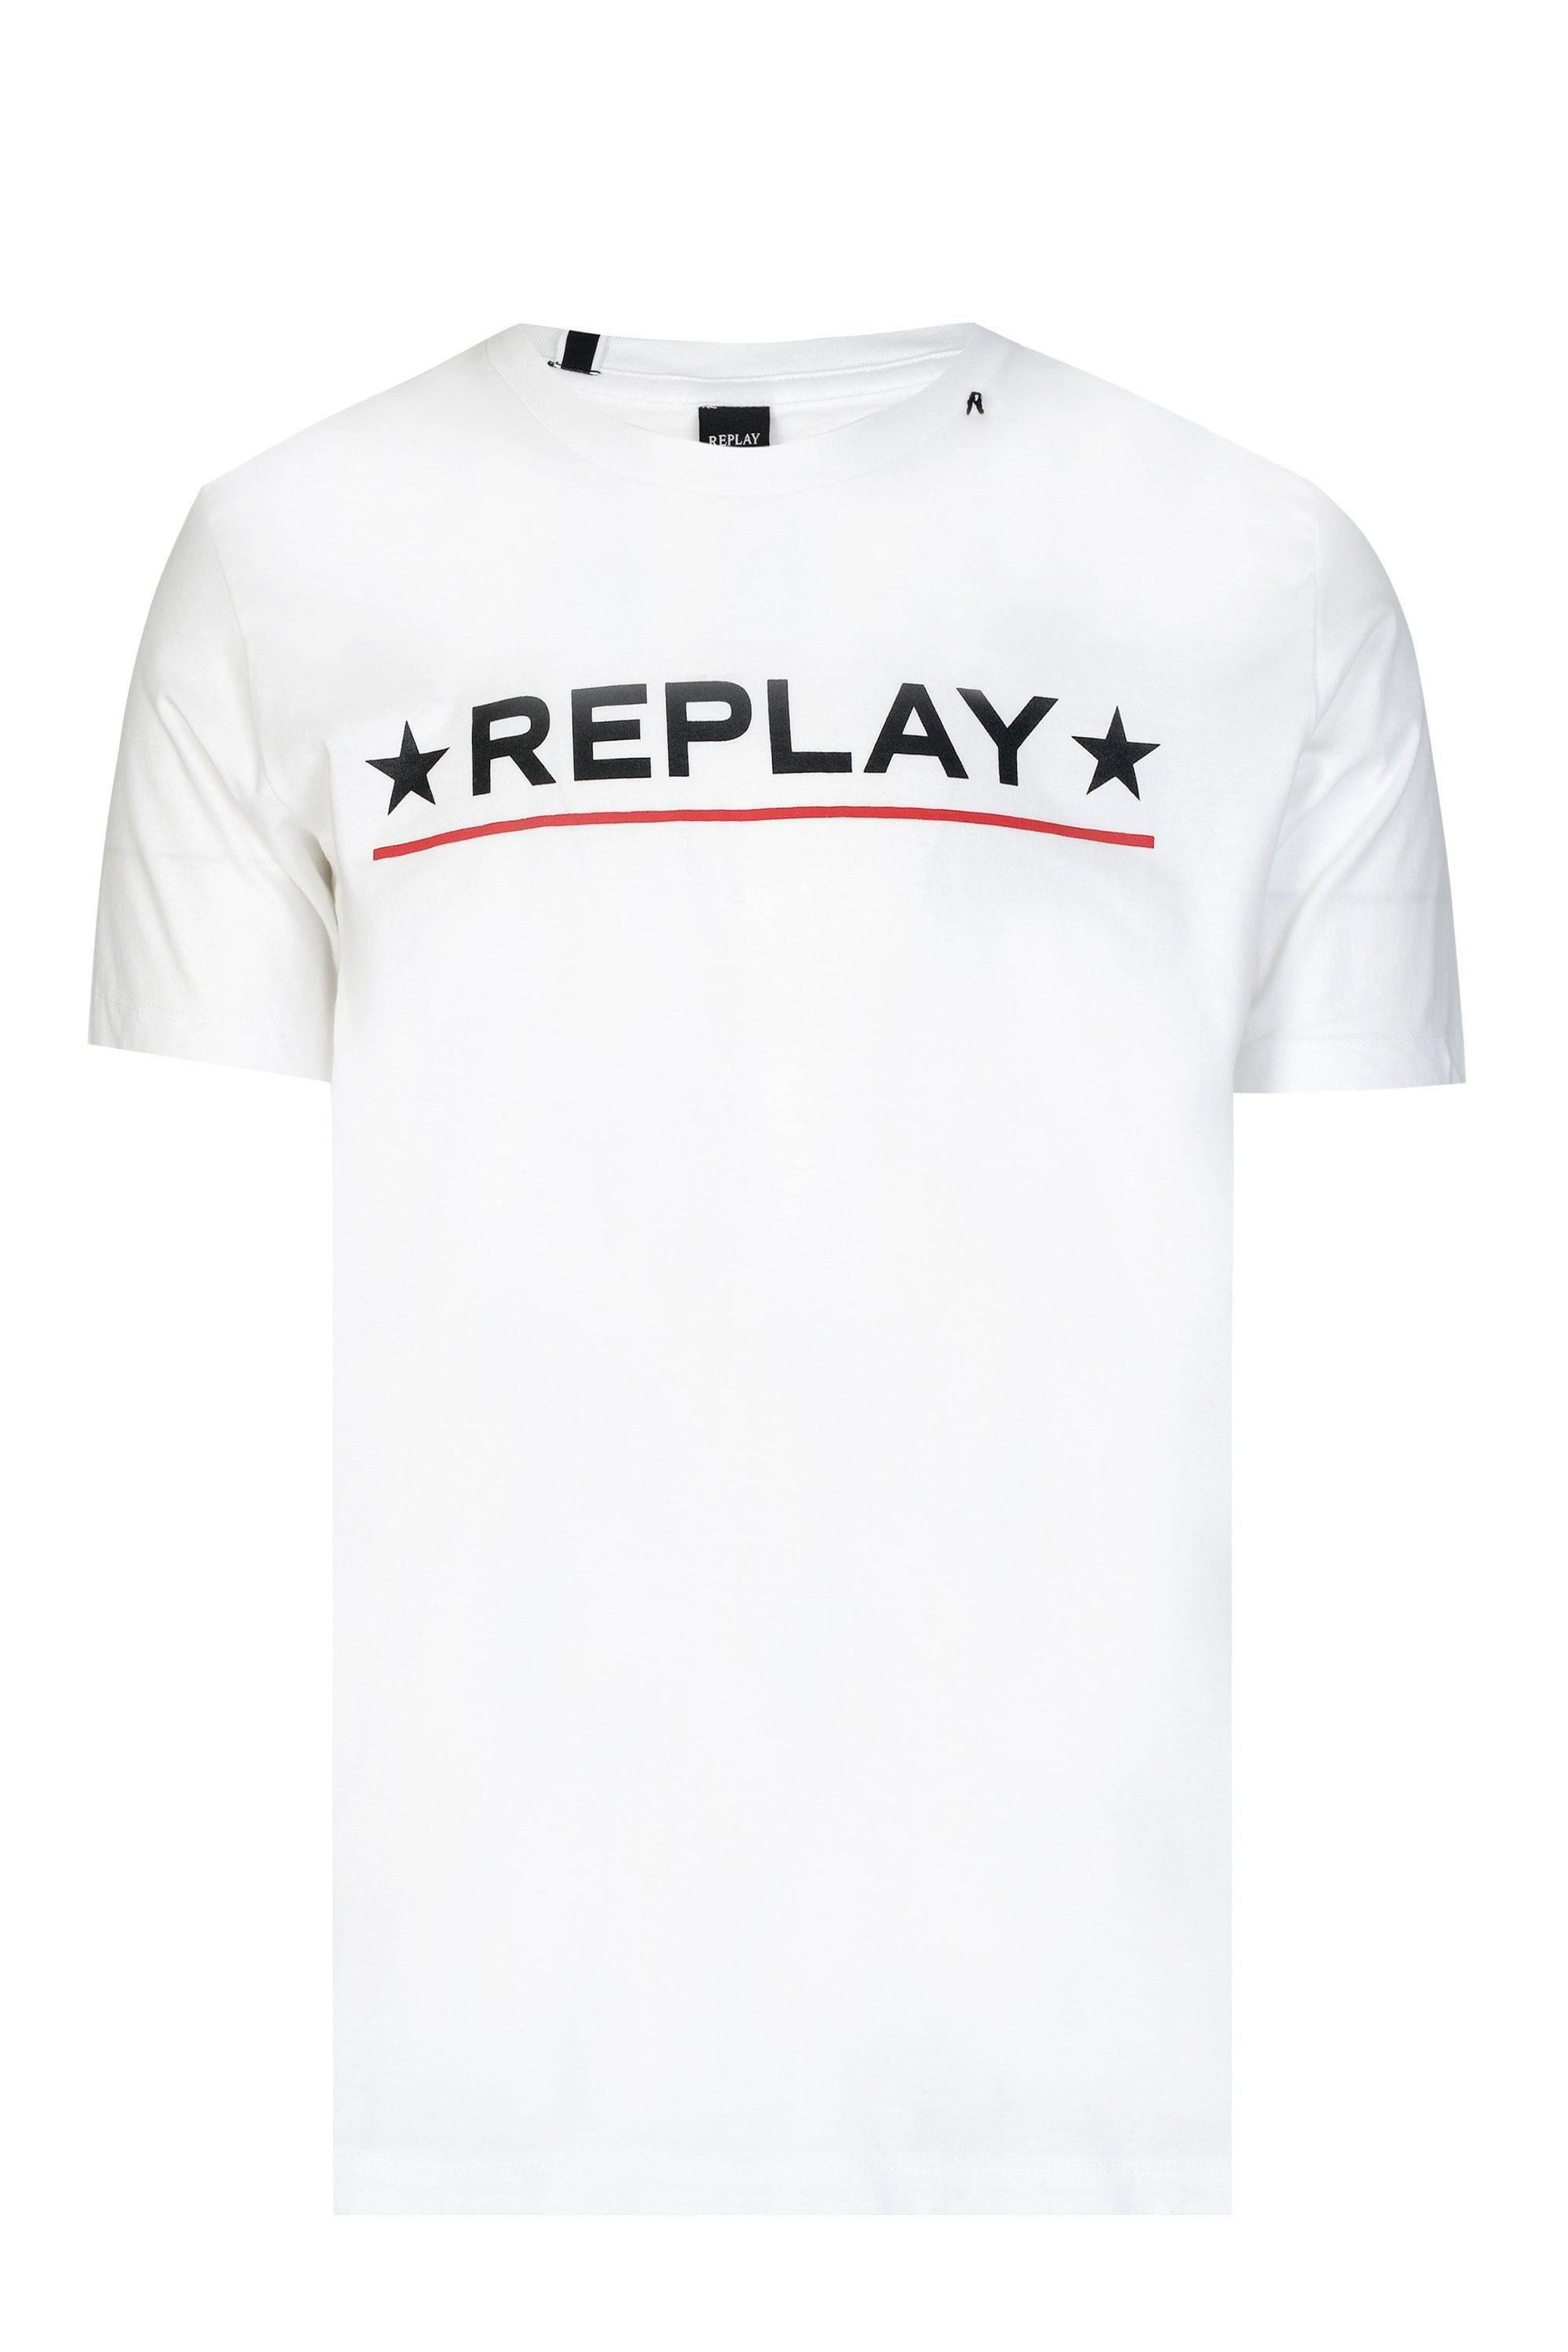 T and Star Logo - Replay Star Logo T Shirt In White For Men